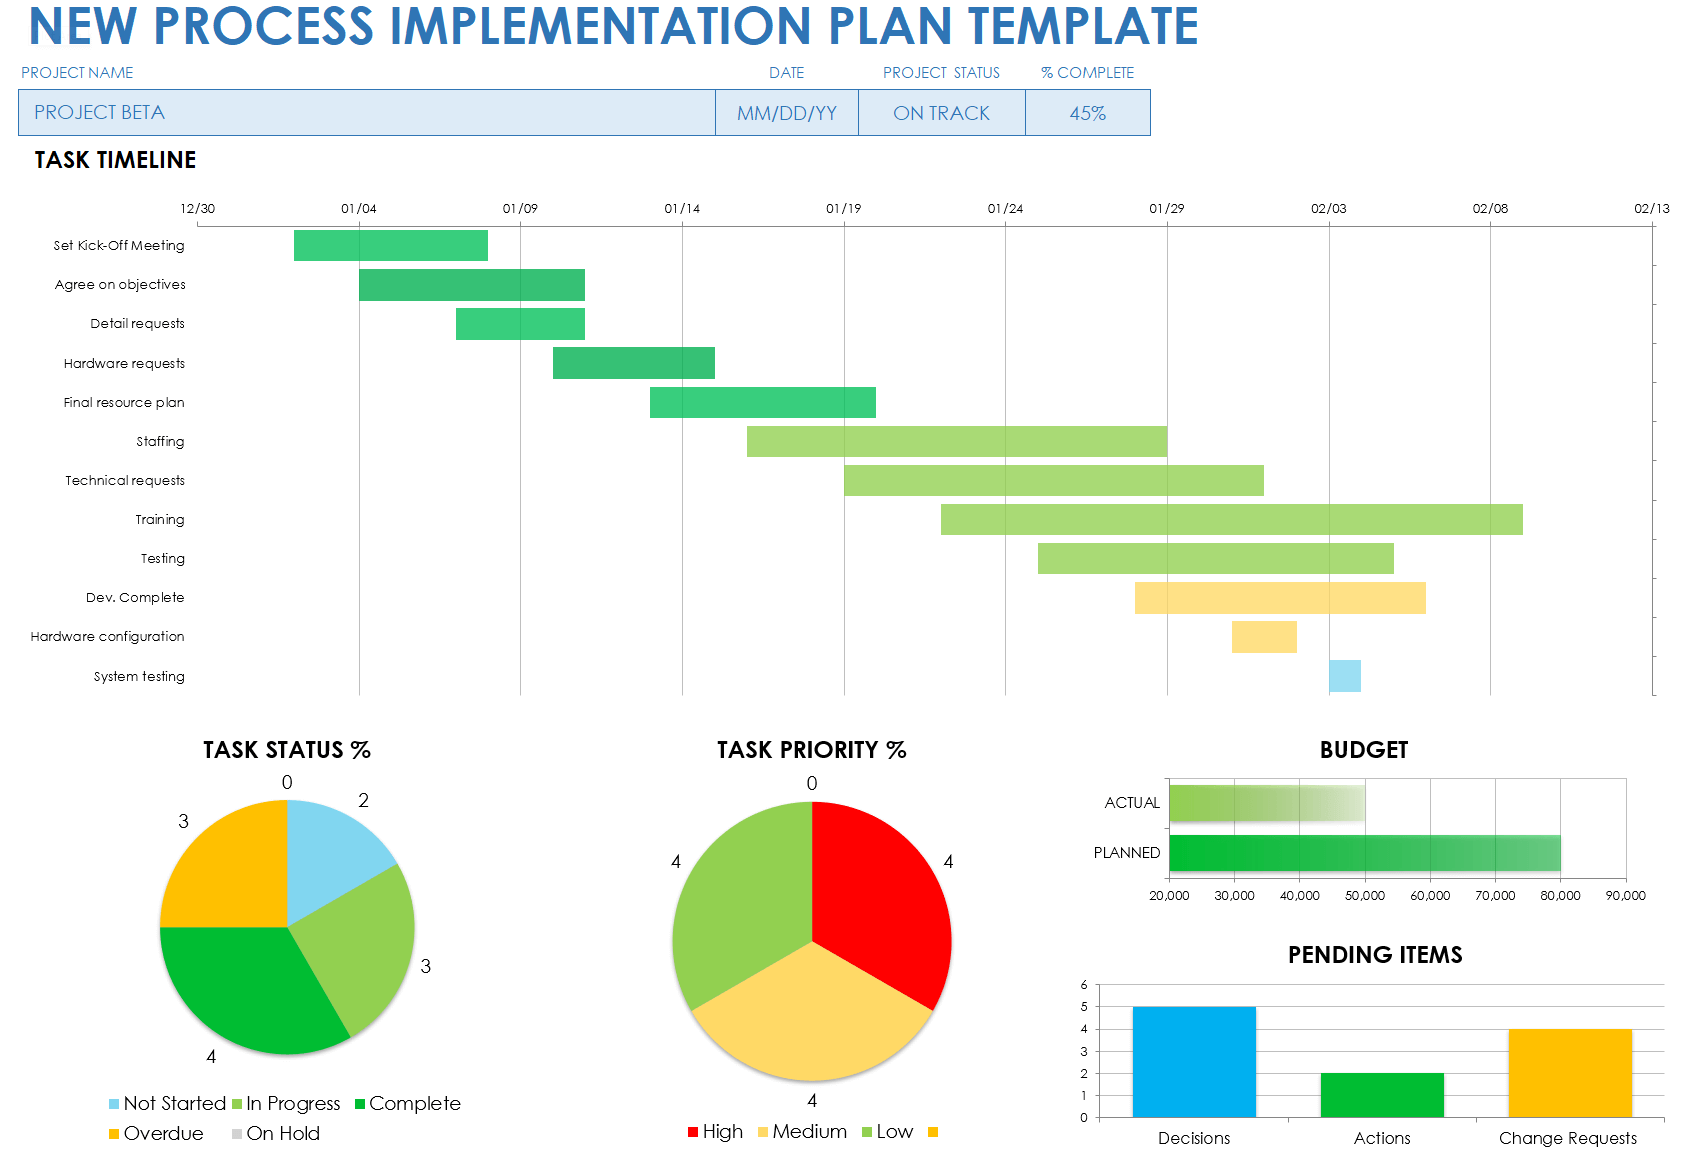 New Process Implementation Plan Template